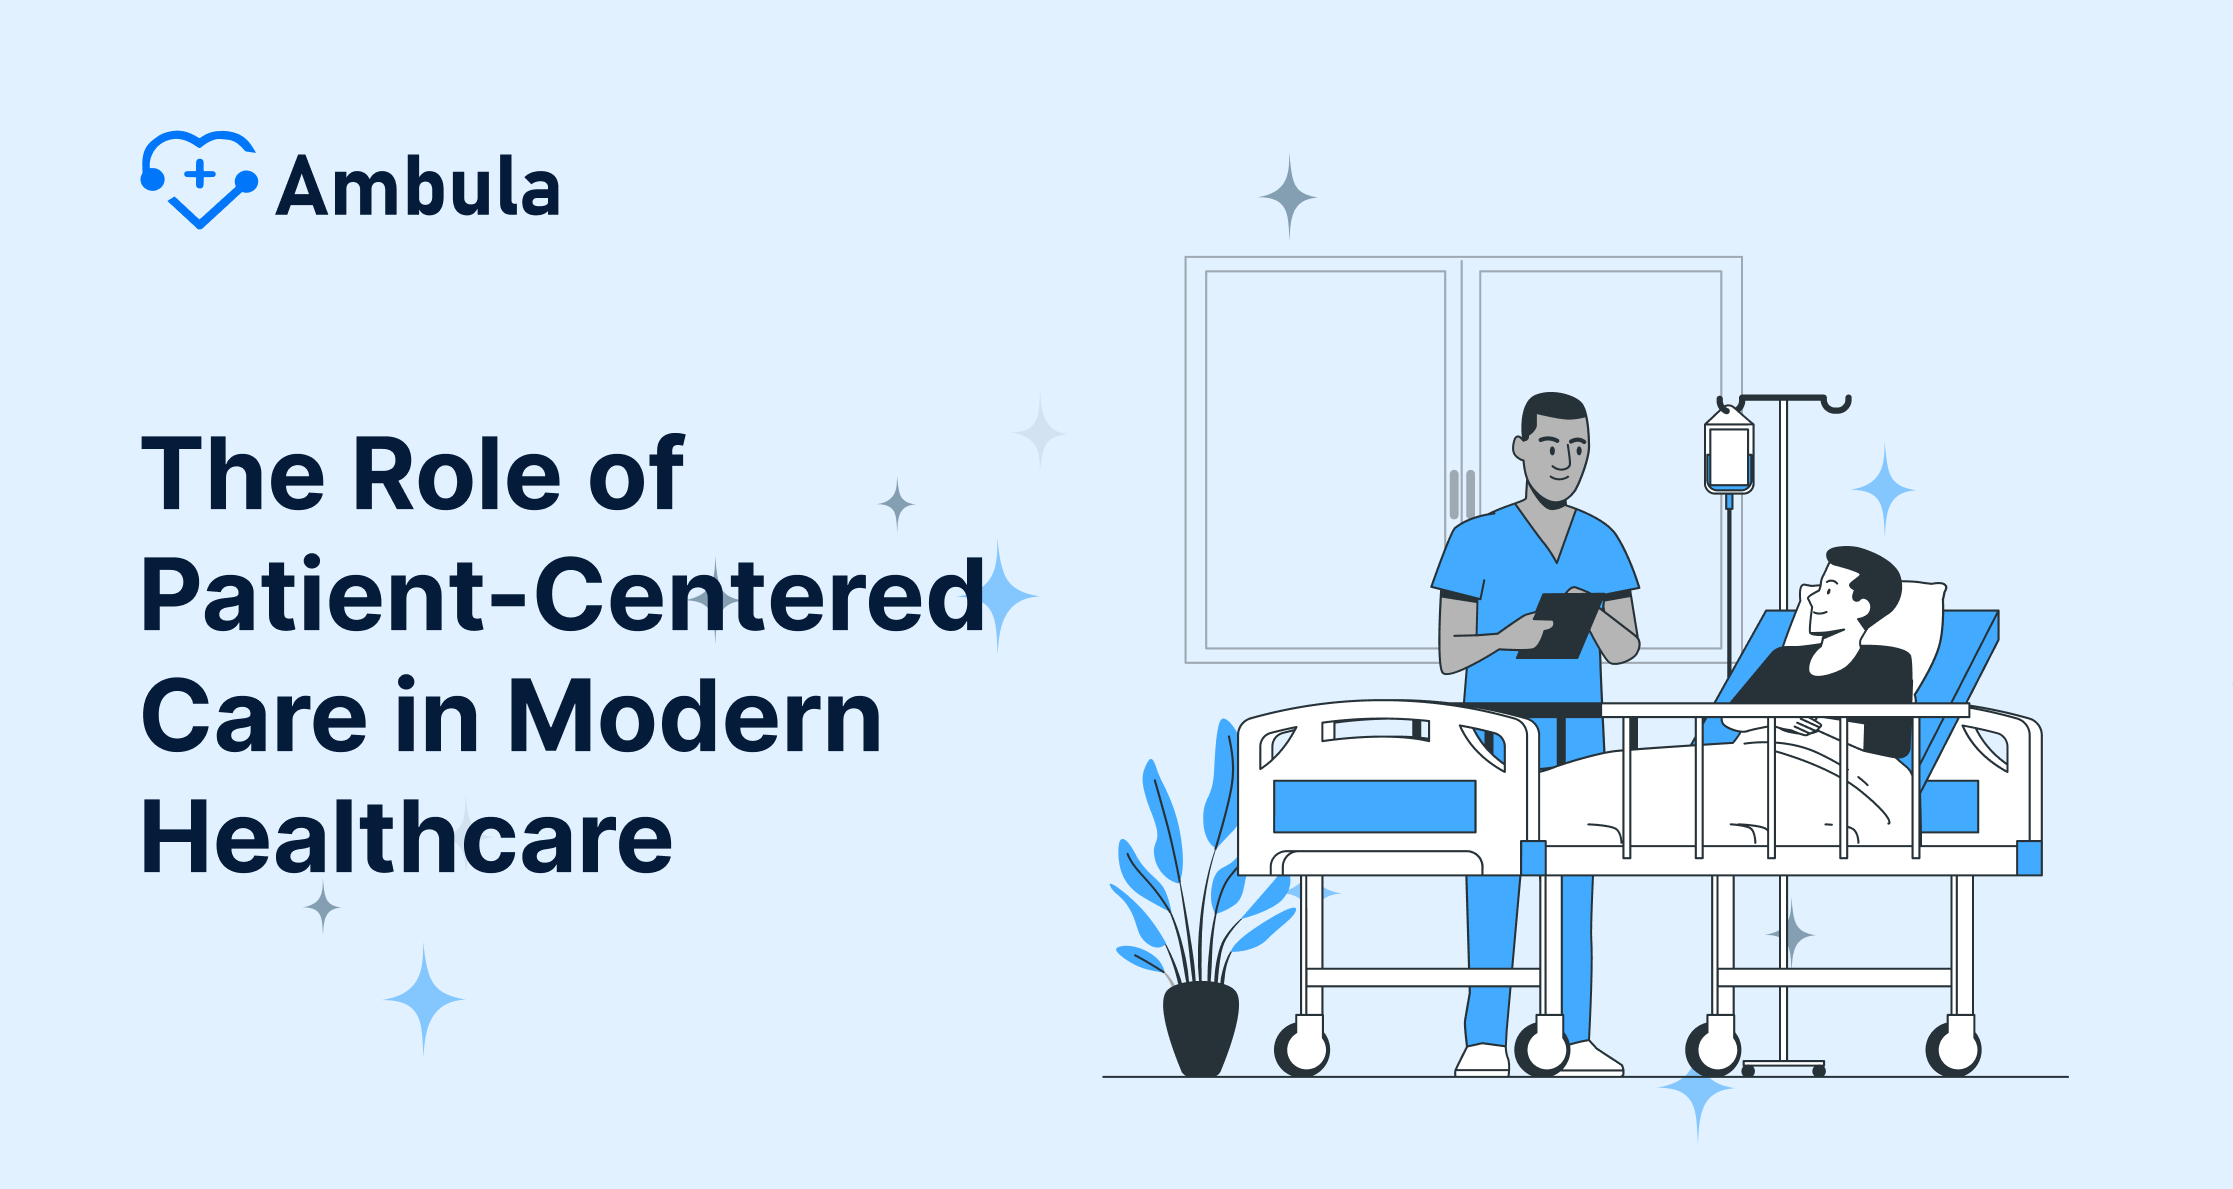 The Role of Patient-Centered Care in Modern Healthcare